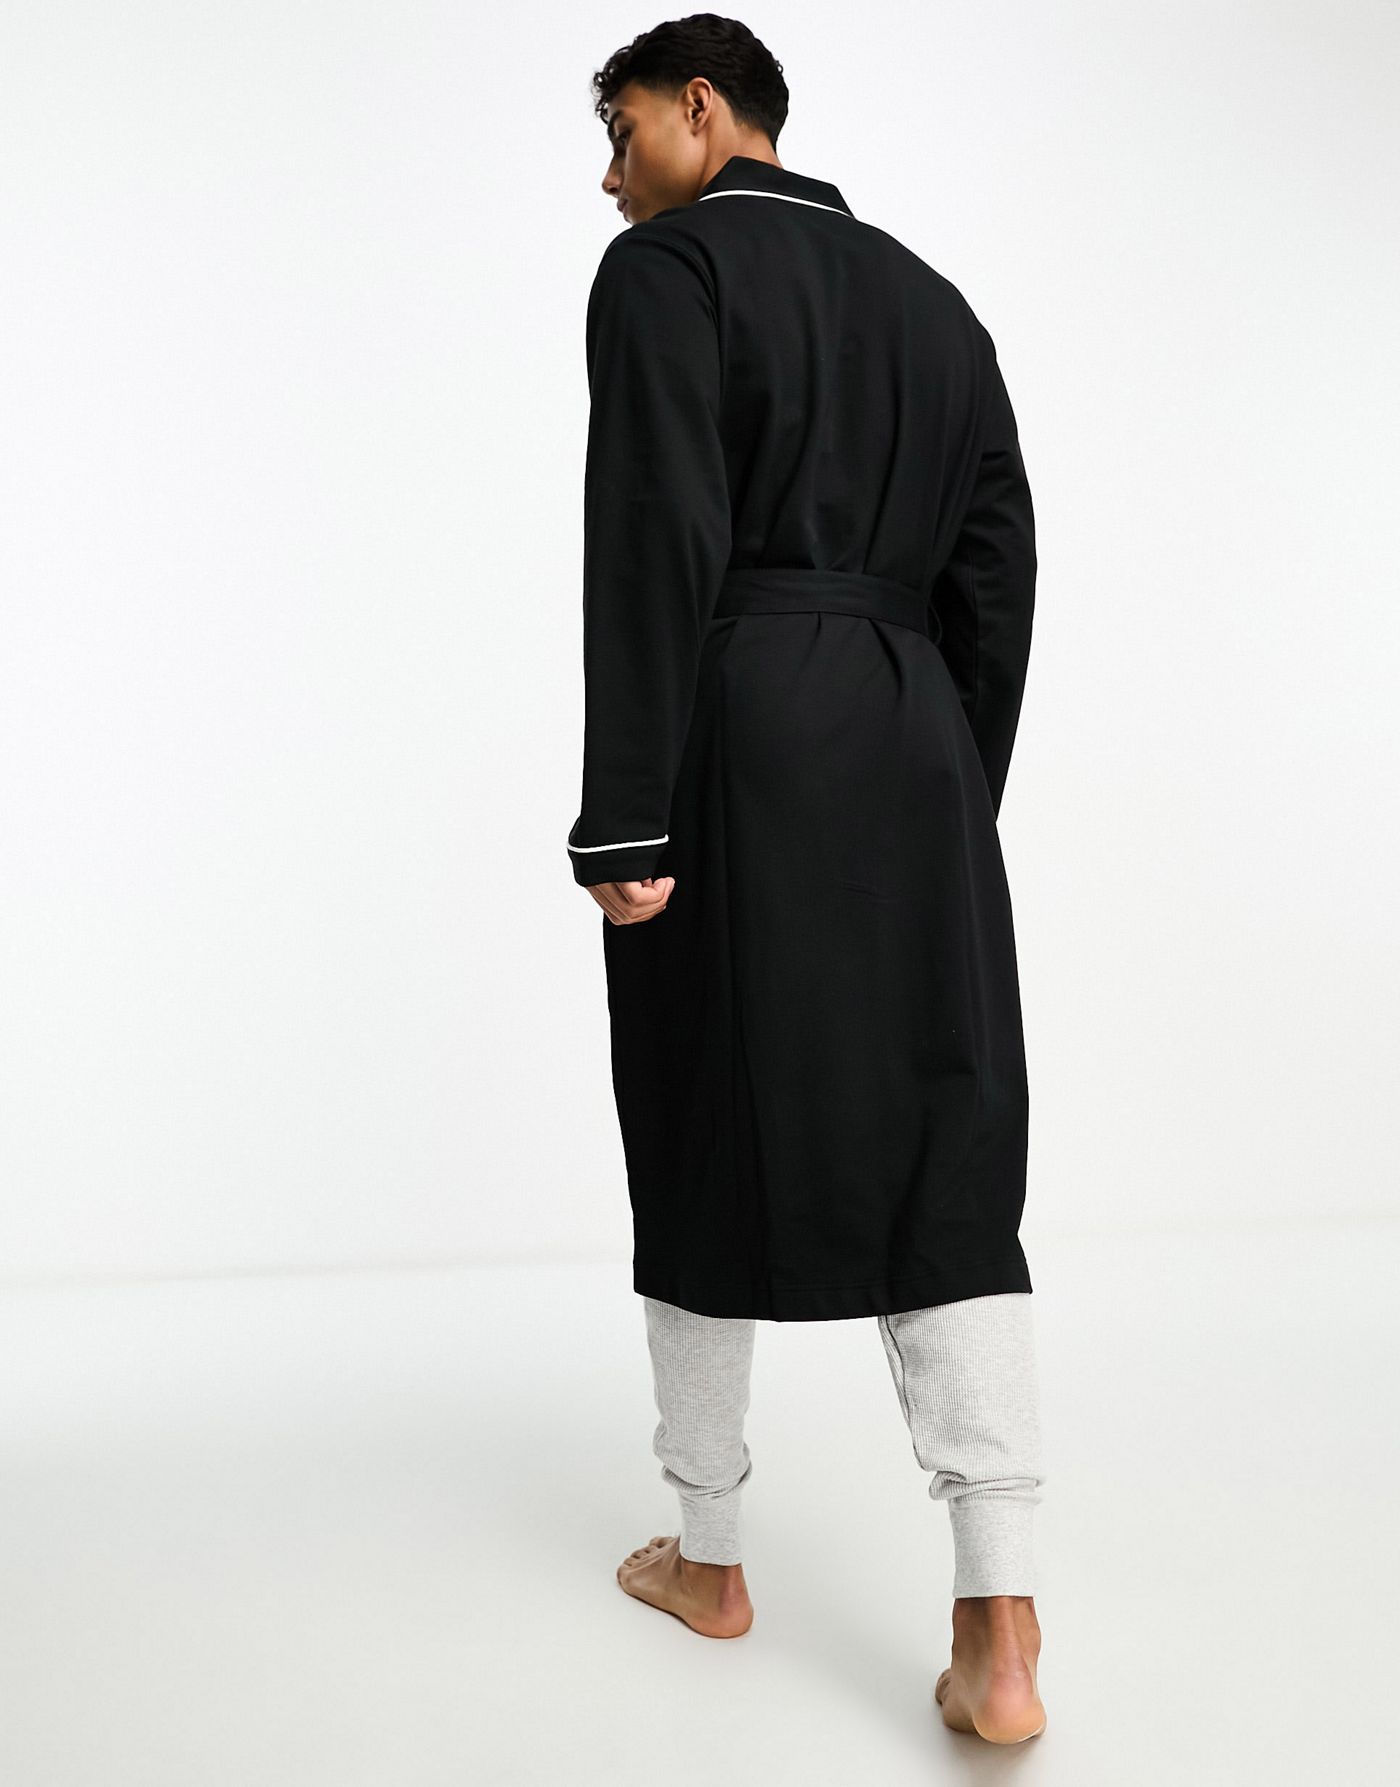 Polo Ralph Lauren lounge dressing gown in black with pony logo